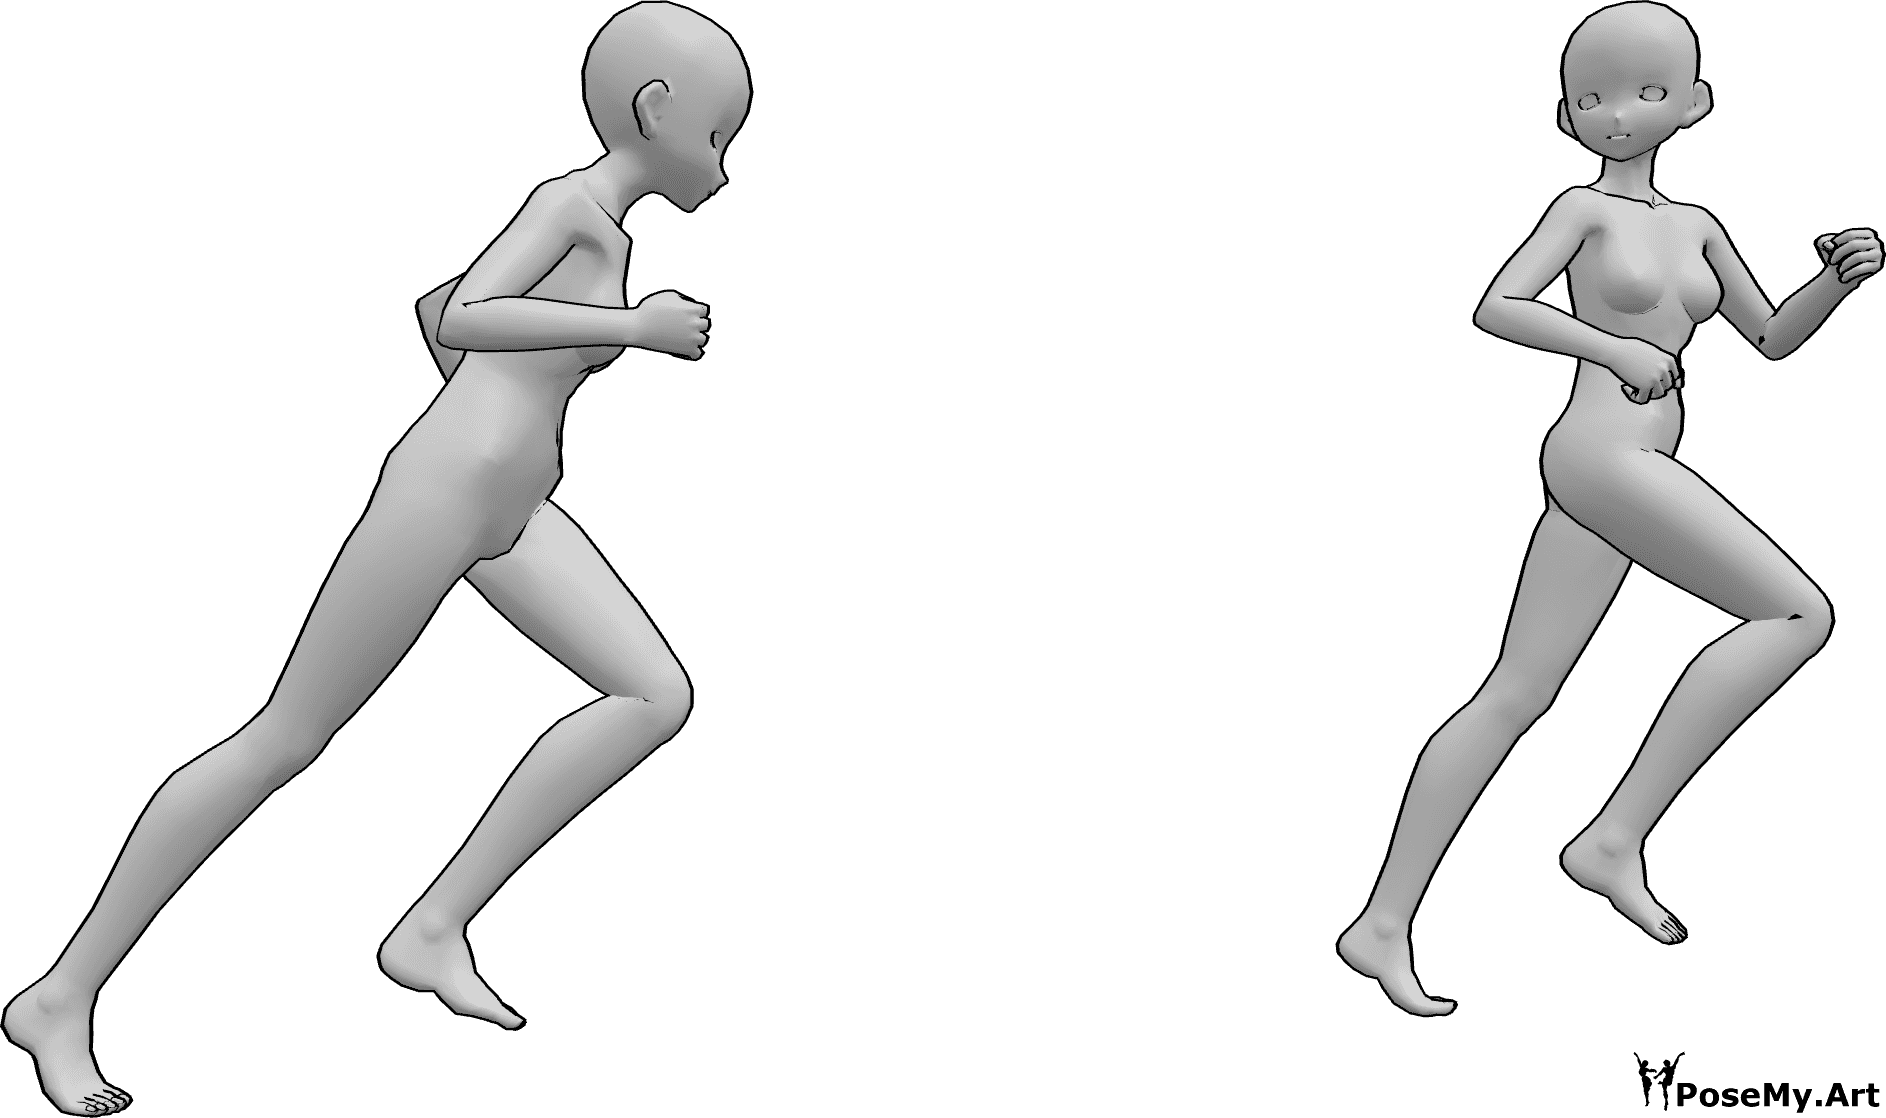 Pose Reference- Anime running chasing pose - Two anime females are running, one is chasing the other, who is looking back while running away